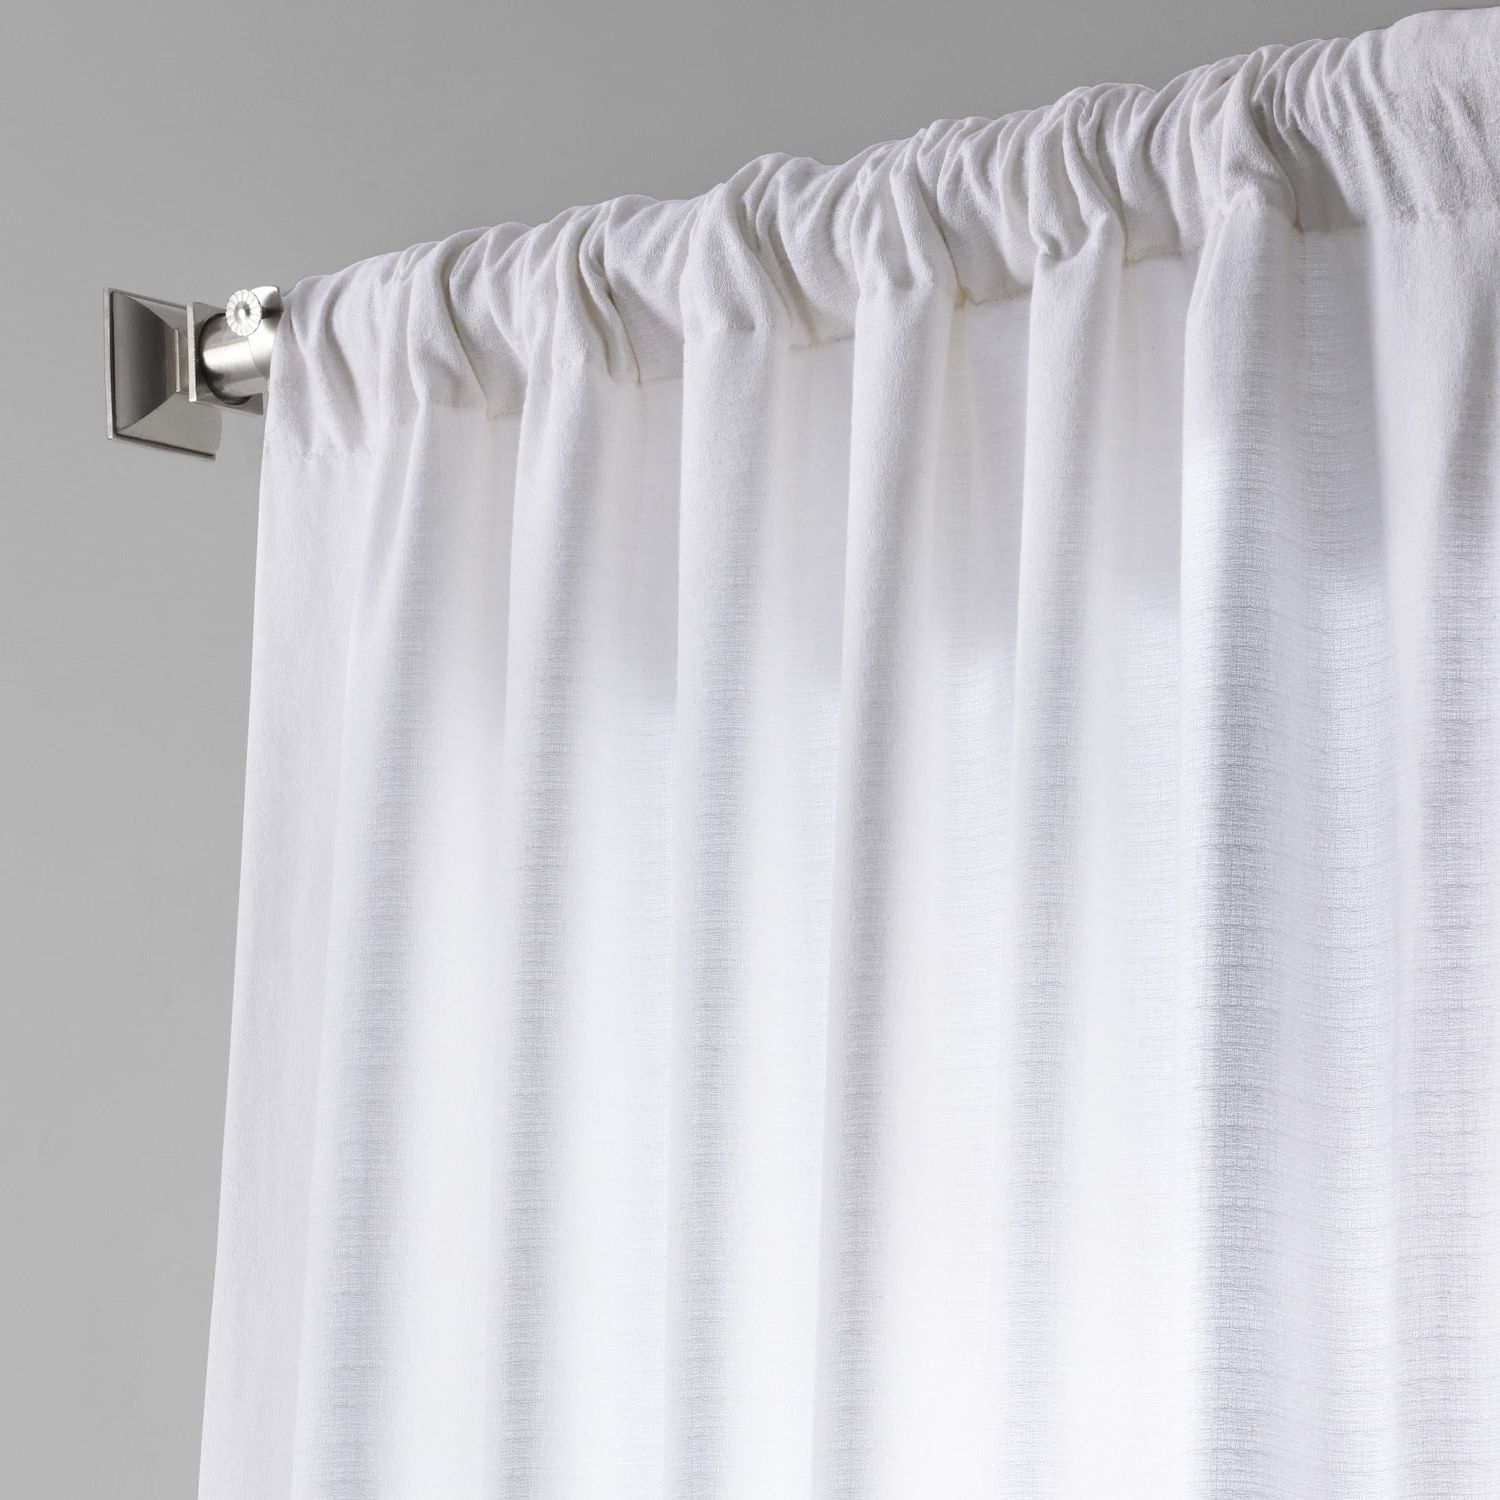 Shop Exclusive Fabrics Bark Weave Solid Cotton Curtain – On With Regard To Most Recent Bark Weave Solid Cotton Curtains (View 19 of 20)